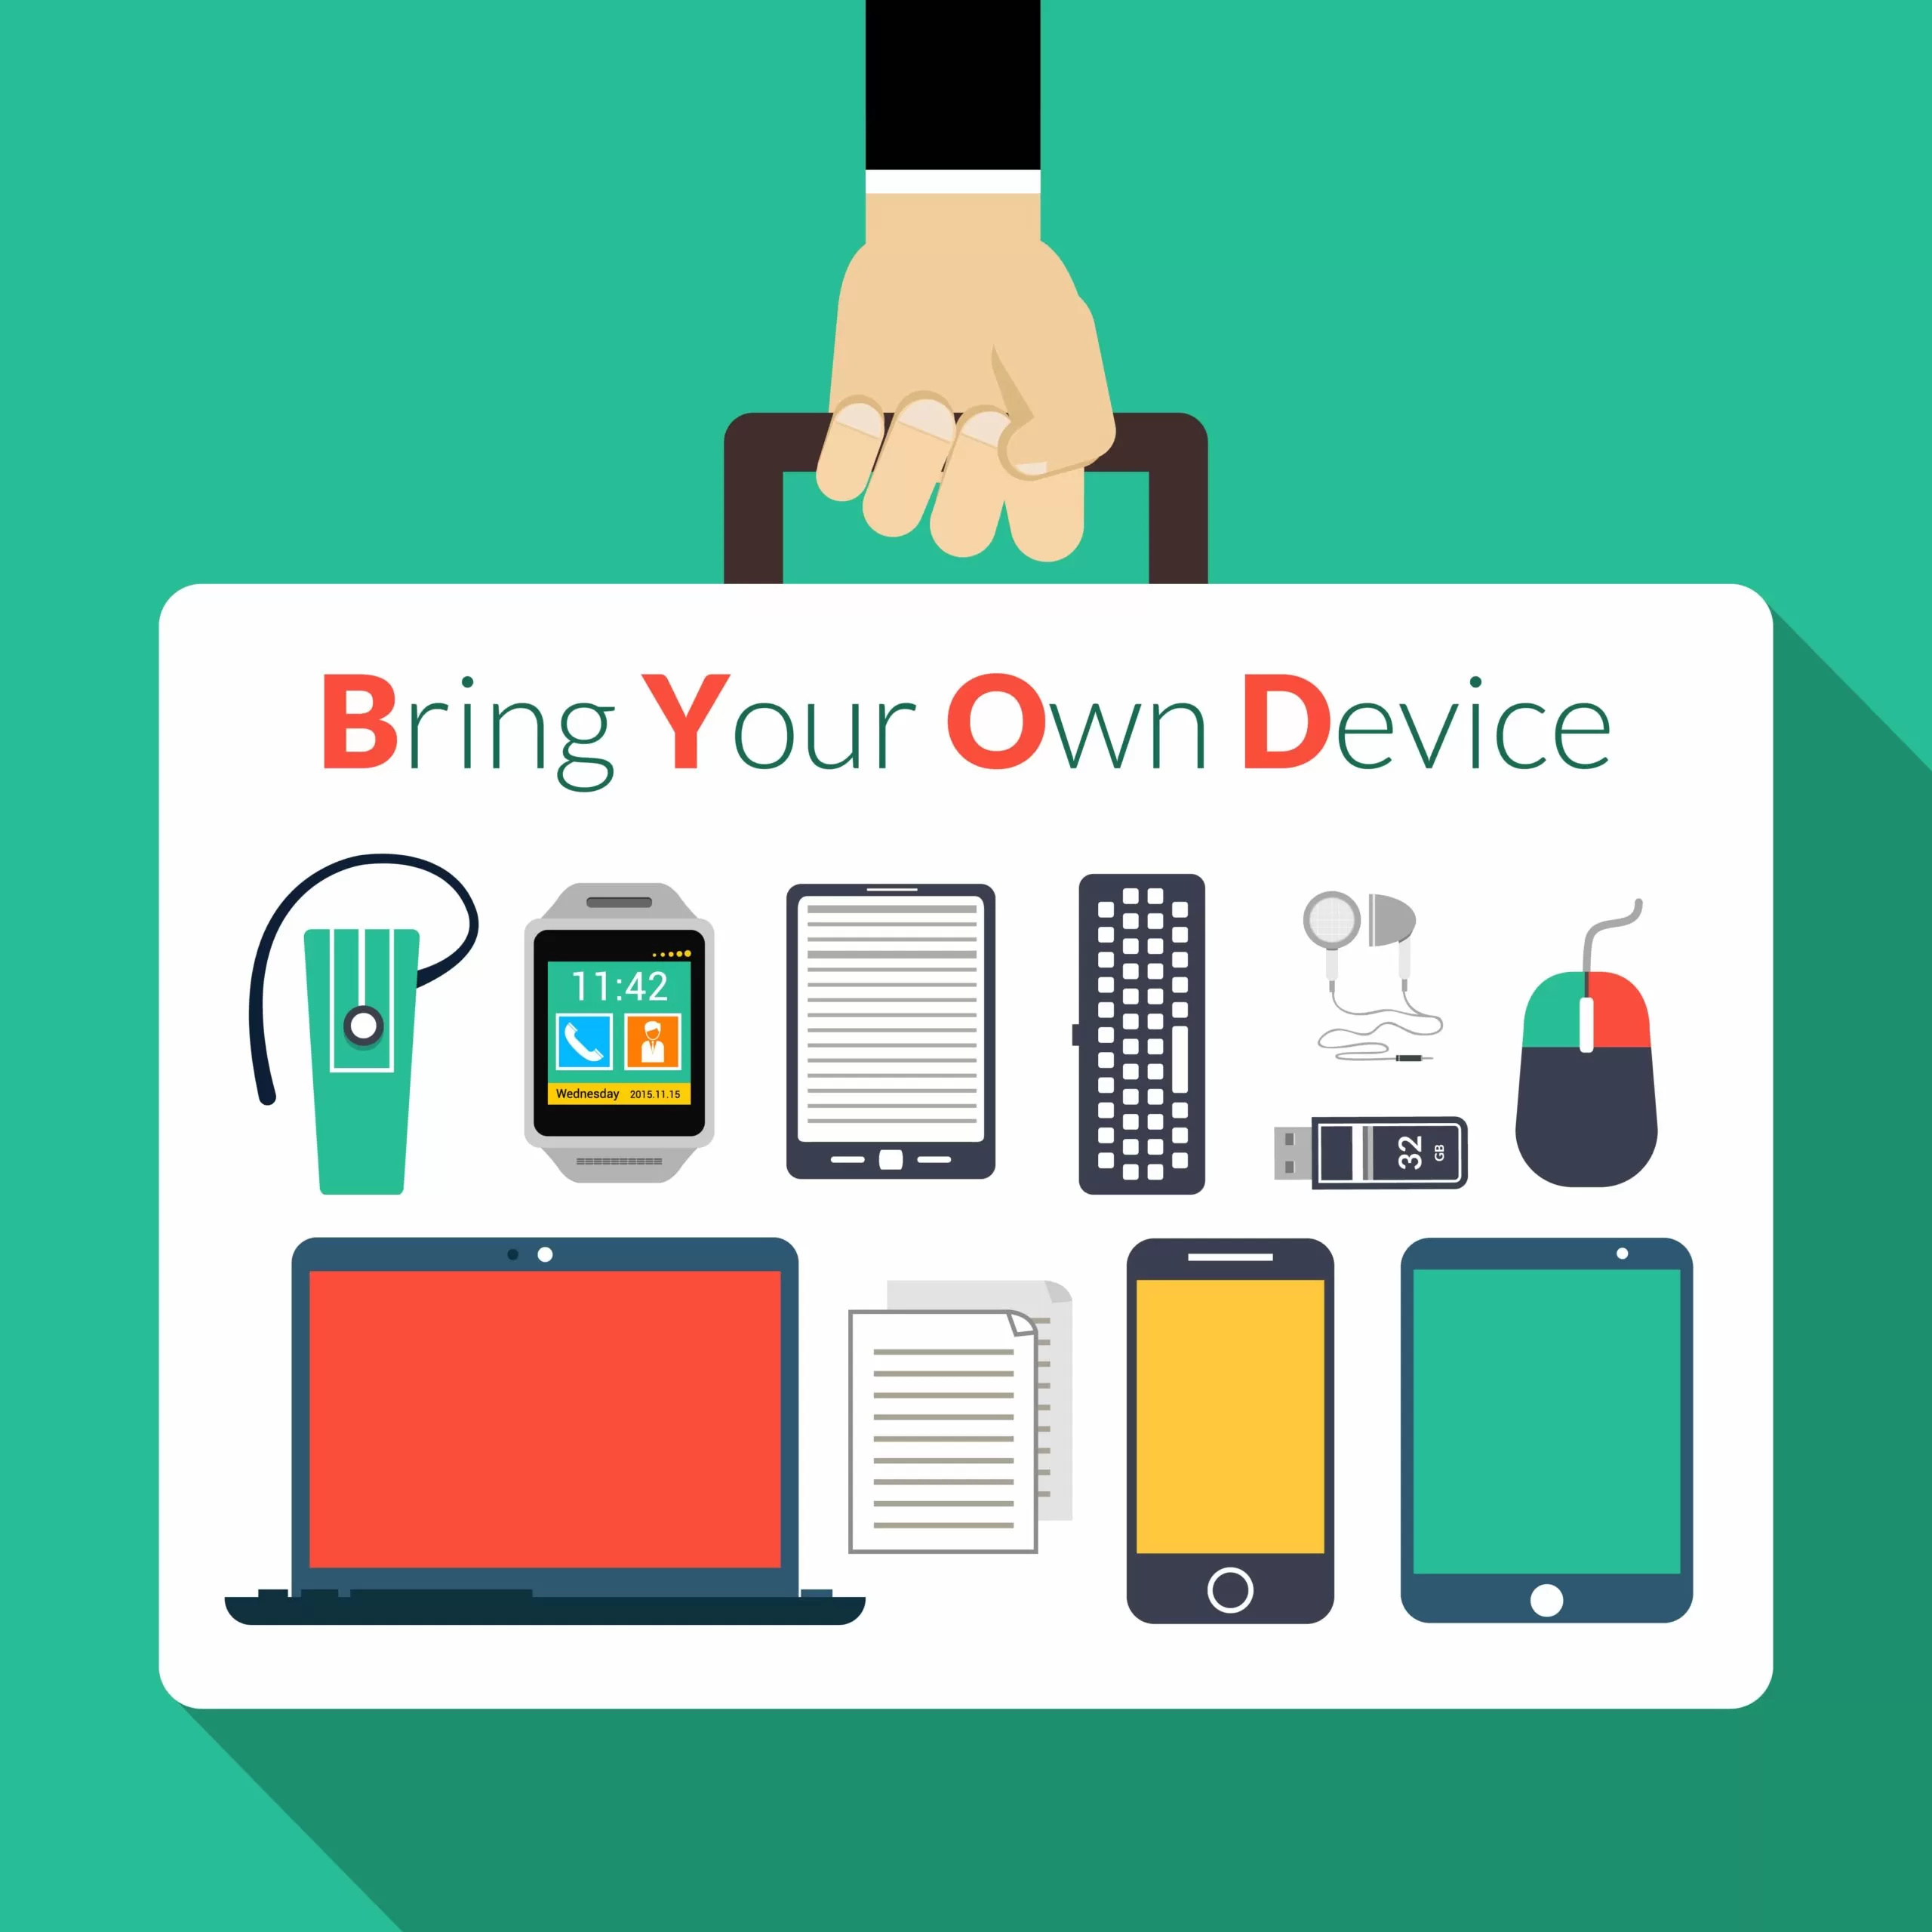 BYOD - Bring Your Own Device